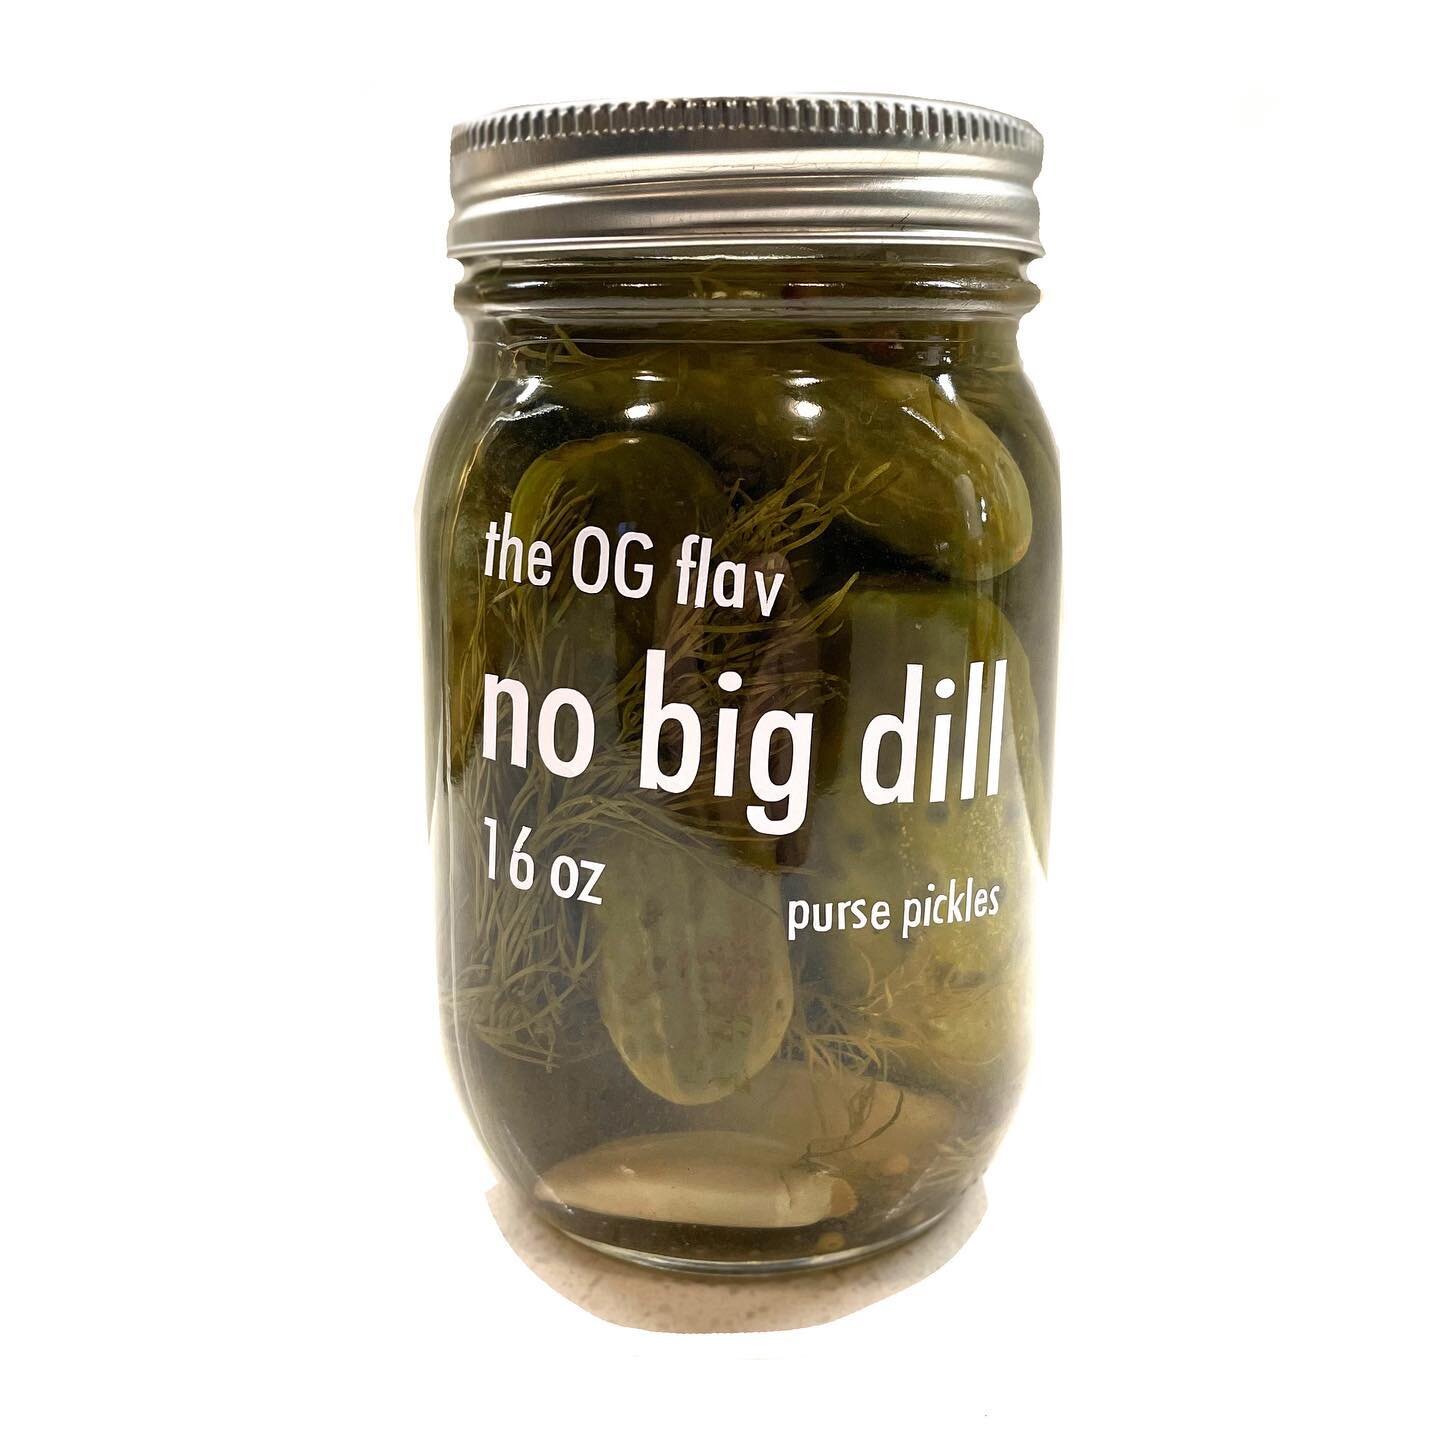 purse pickles: when you can&rsquo;t leave your dills at home.

our 16 oz is perfect for sharing on the road

#pickles #dillpickles #gherkins #fermentedfoods #homemadepickles #picklesarelife #gherkinsarelife #nobigdill #babycukes #babycukesarethebest